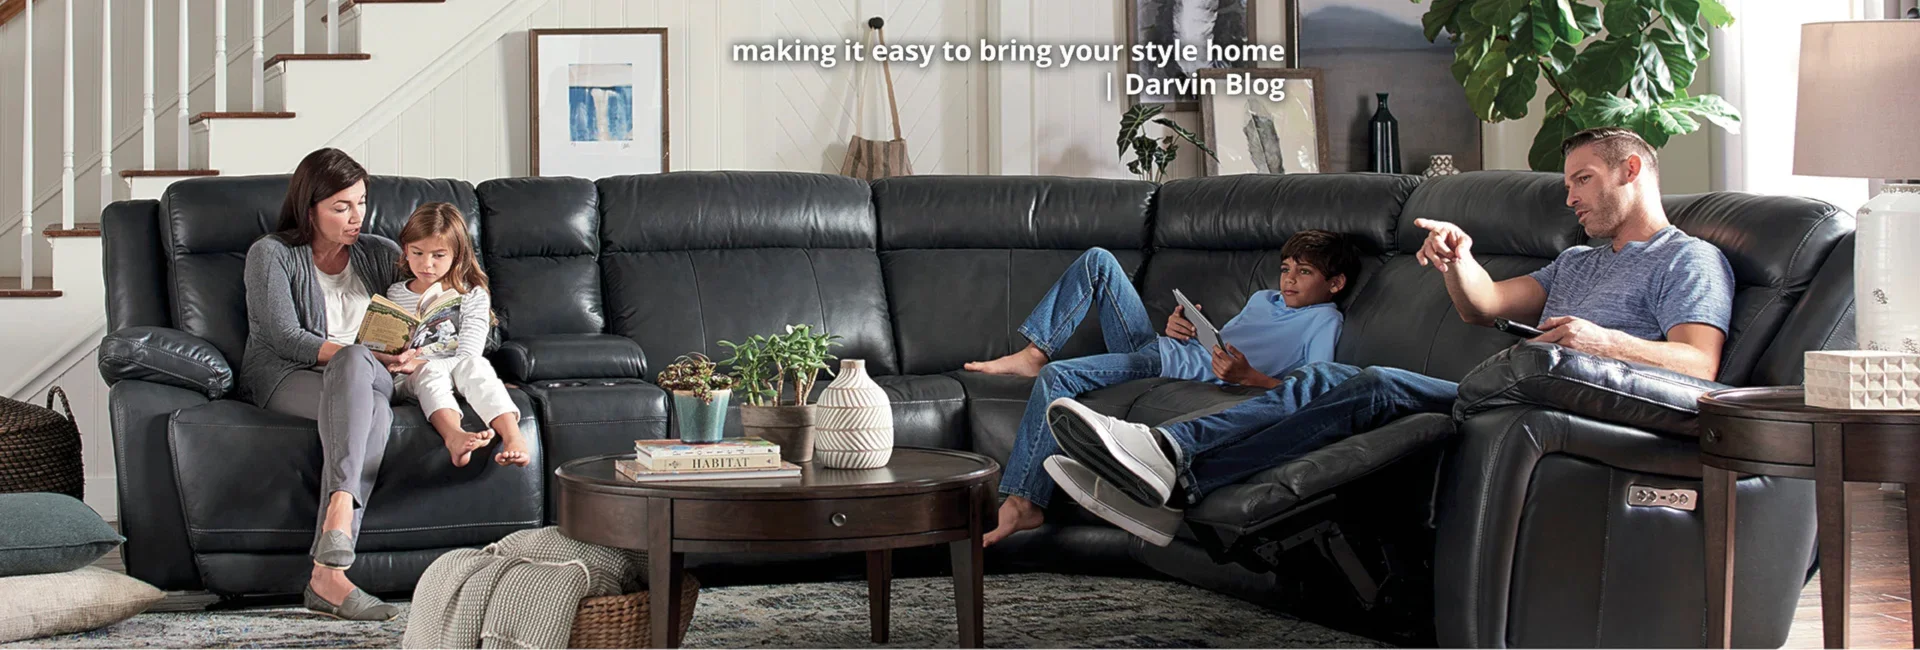 Darvin Blog - Bring your style home with La-Z-Boy Cutting edge design